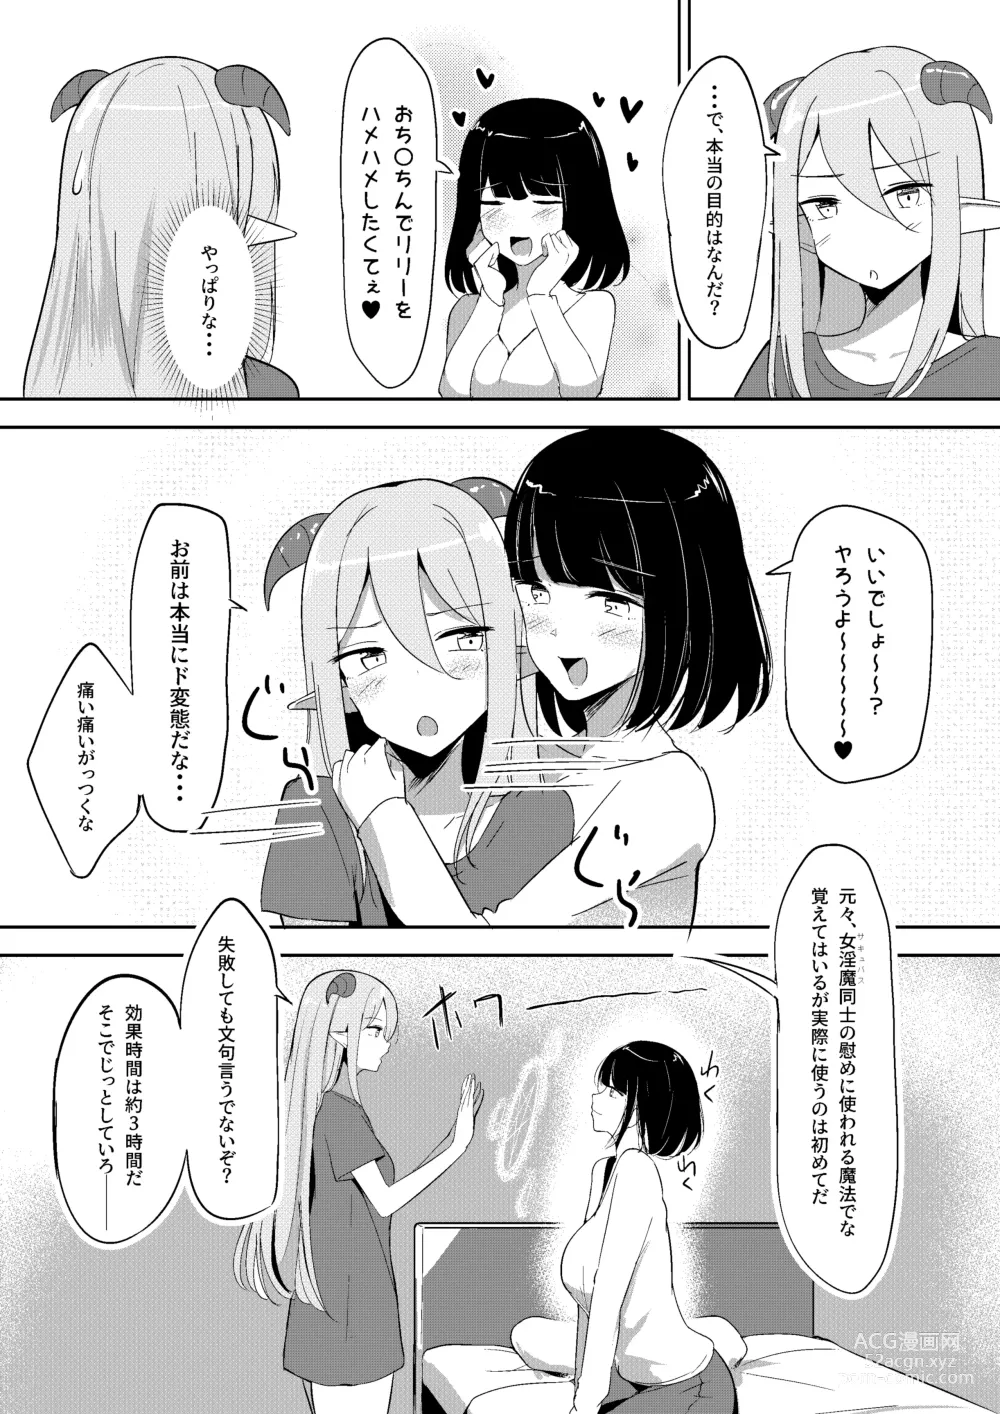 Page 6 of doujinshi Succubus Lily 2